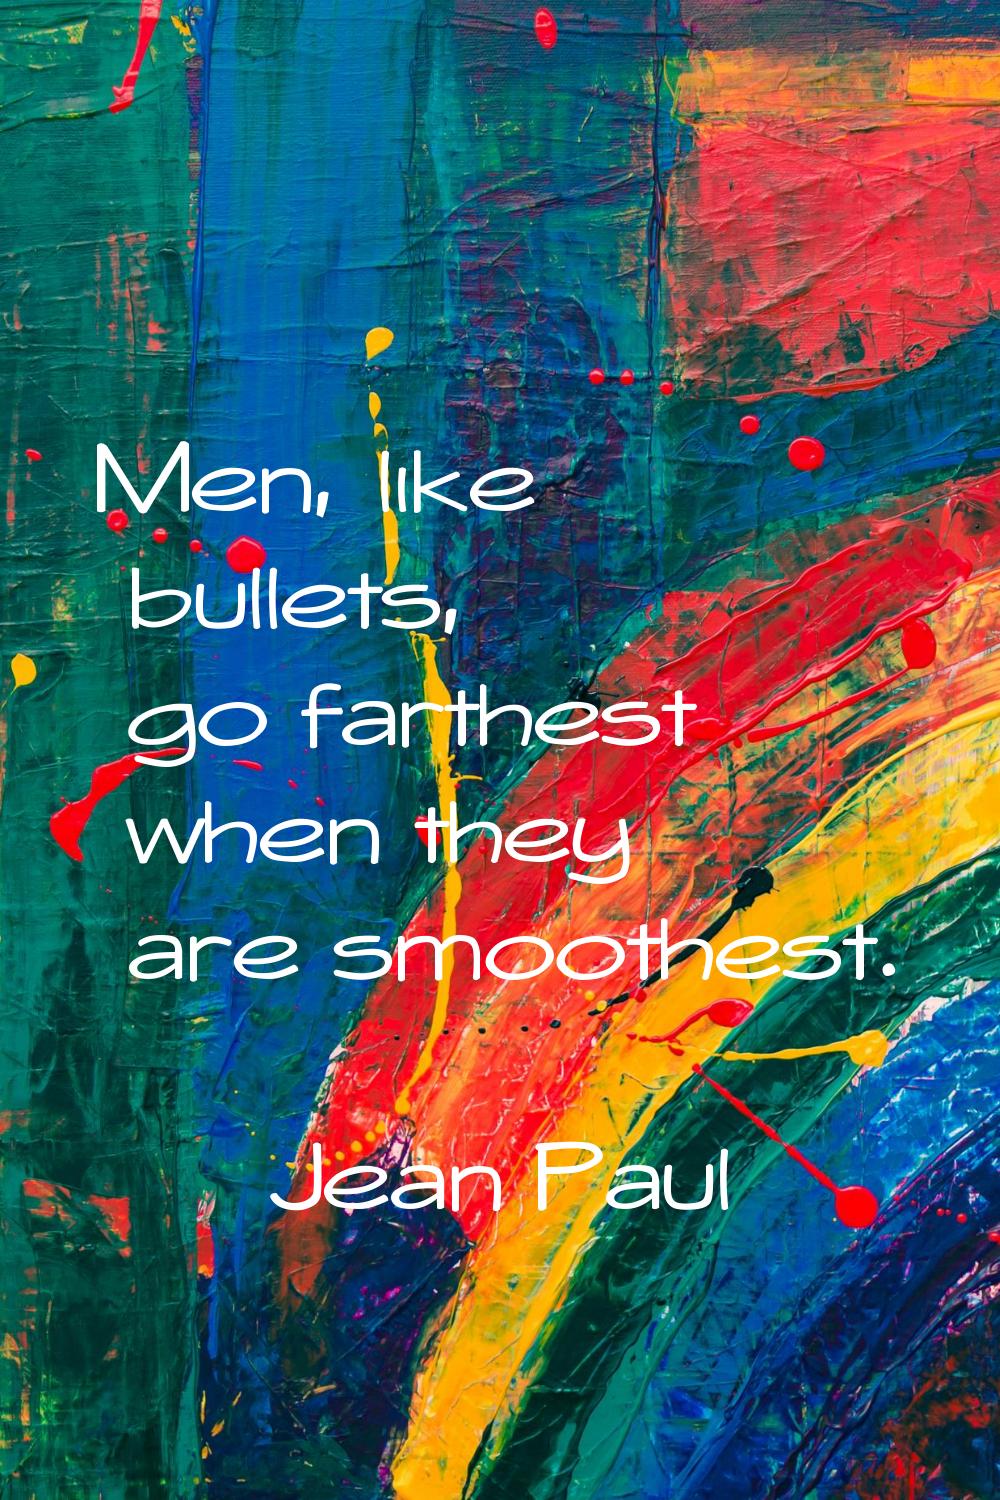 Men, like bullets, go farthest when they are smoothest.